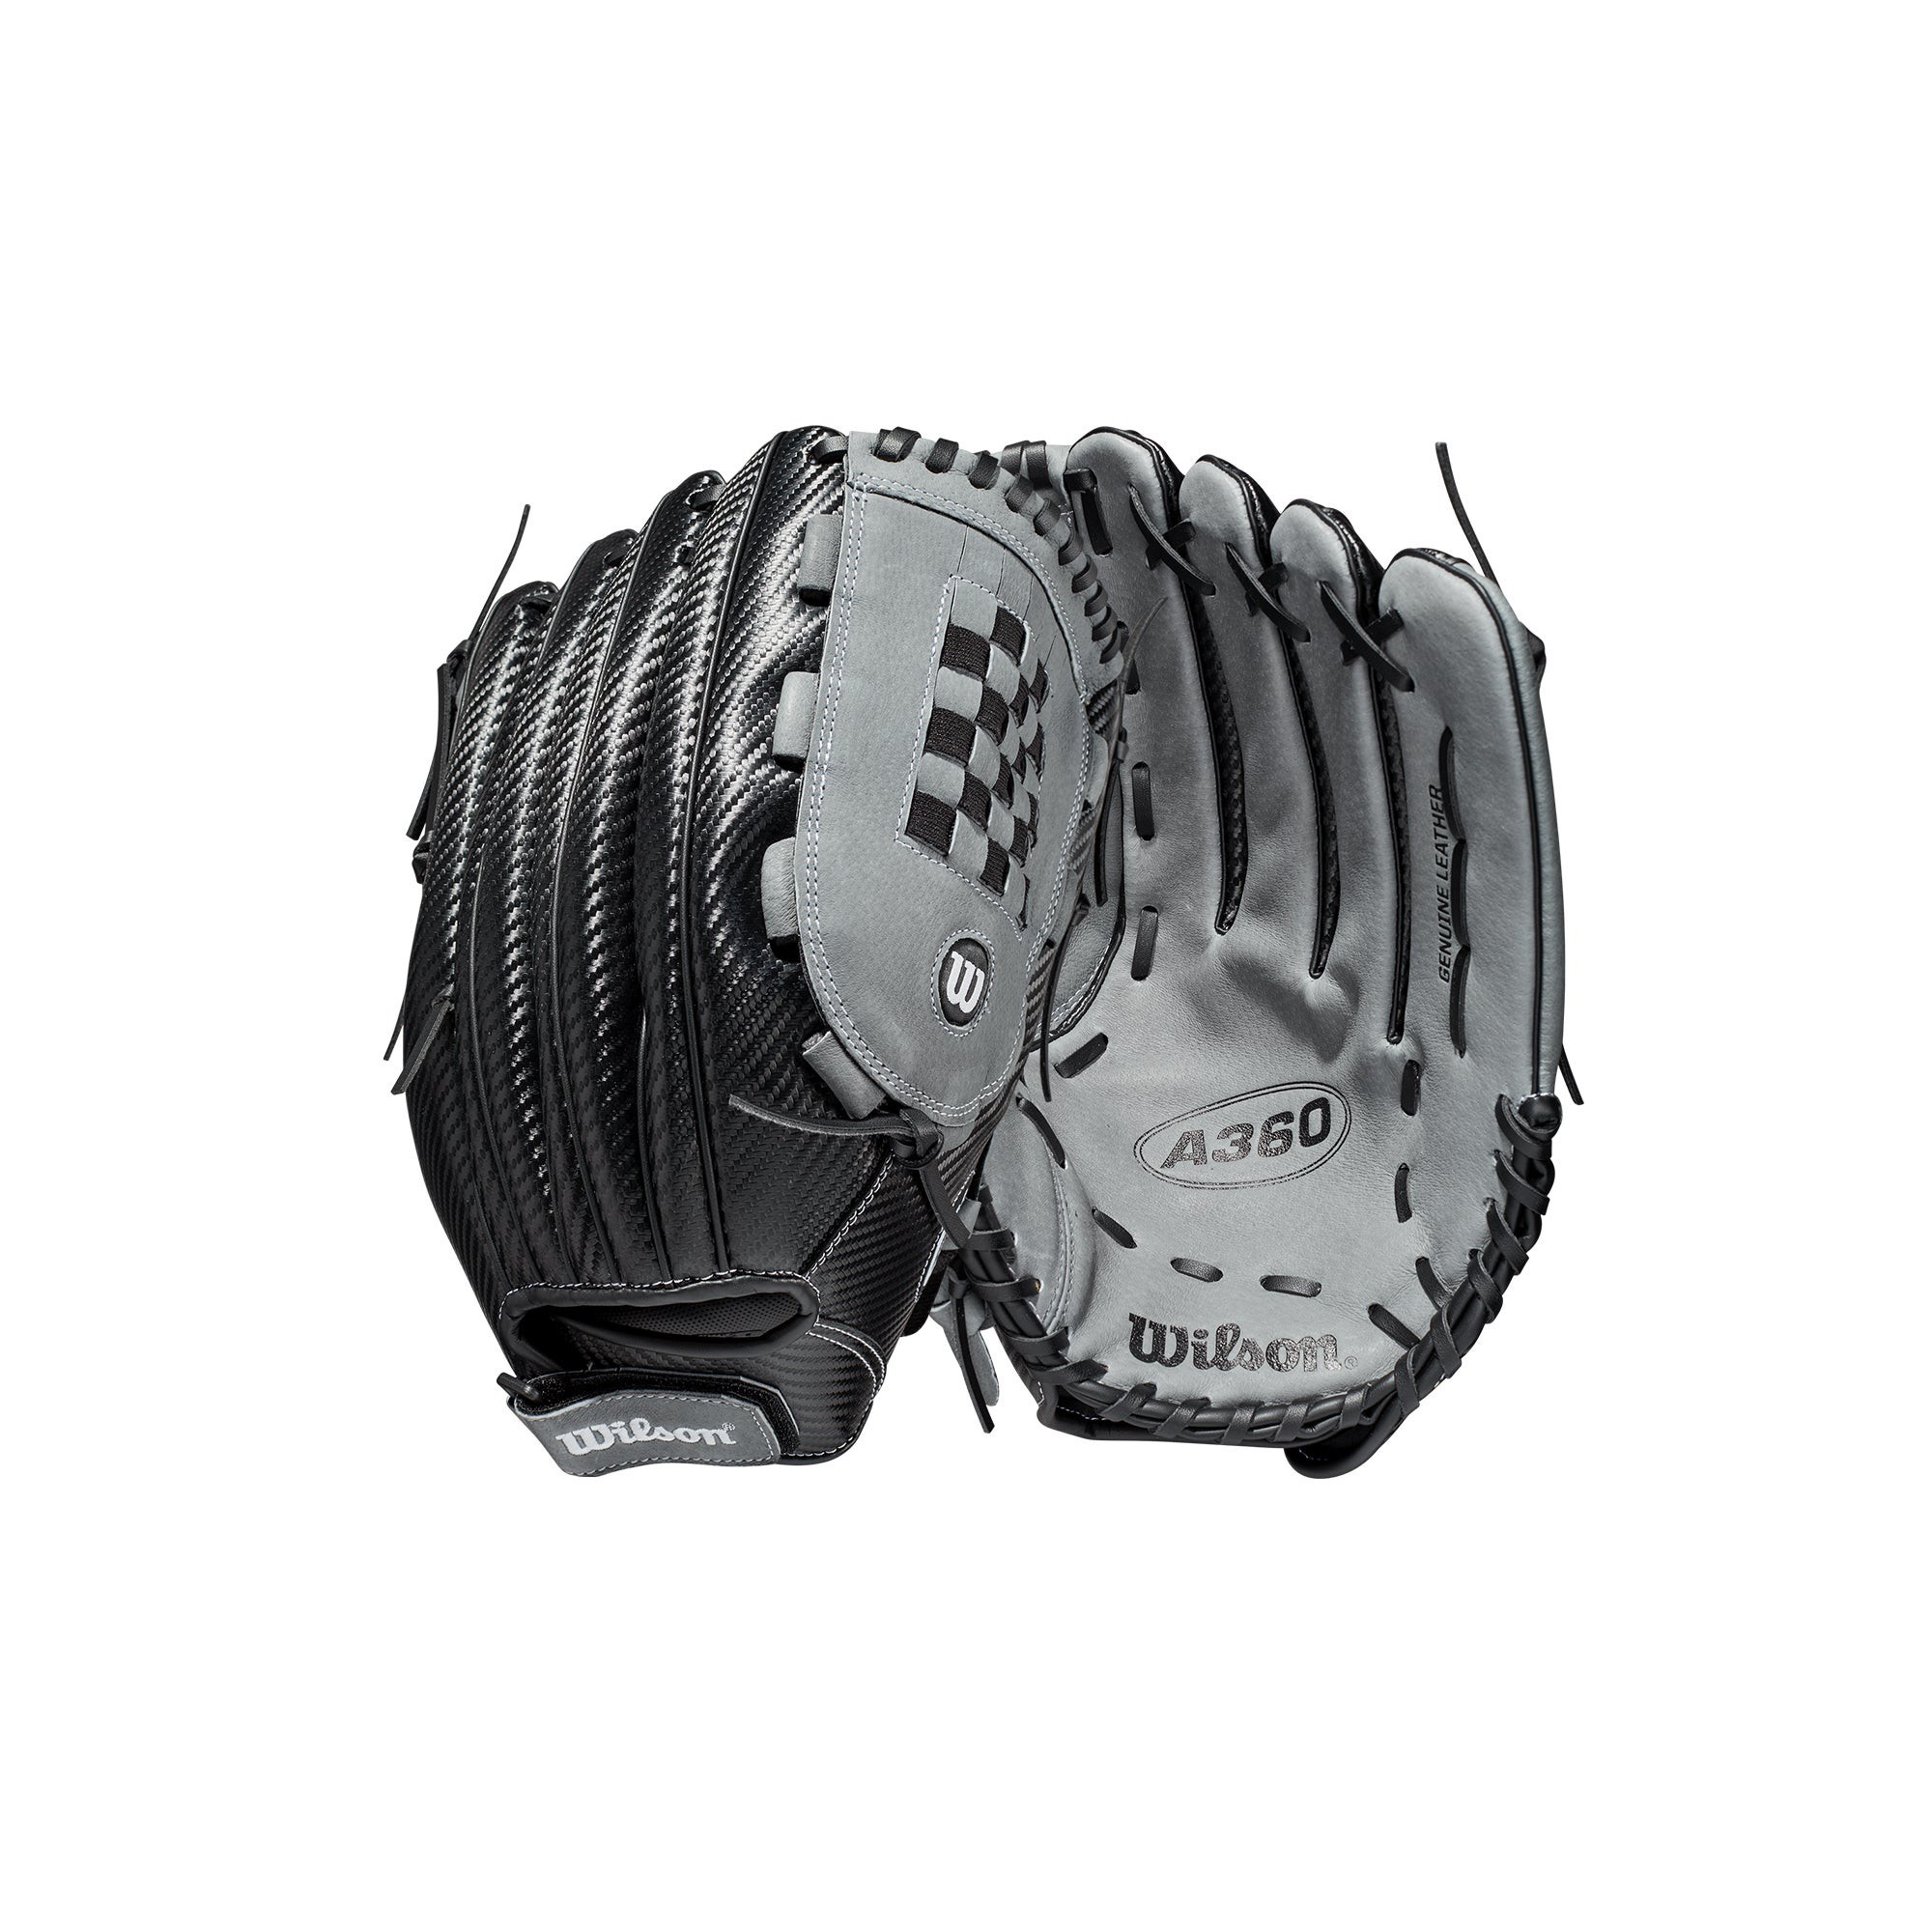 2021 A360 14" Slowpitch Softball Glove Right Hand Thrower